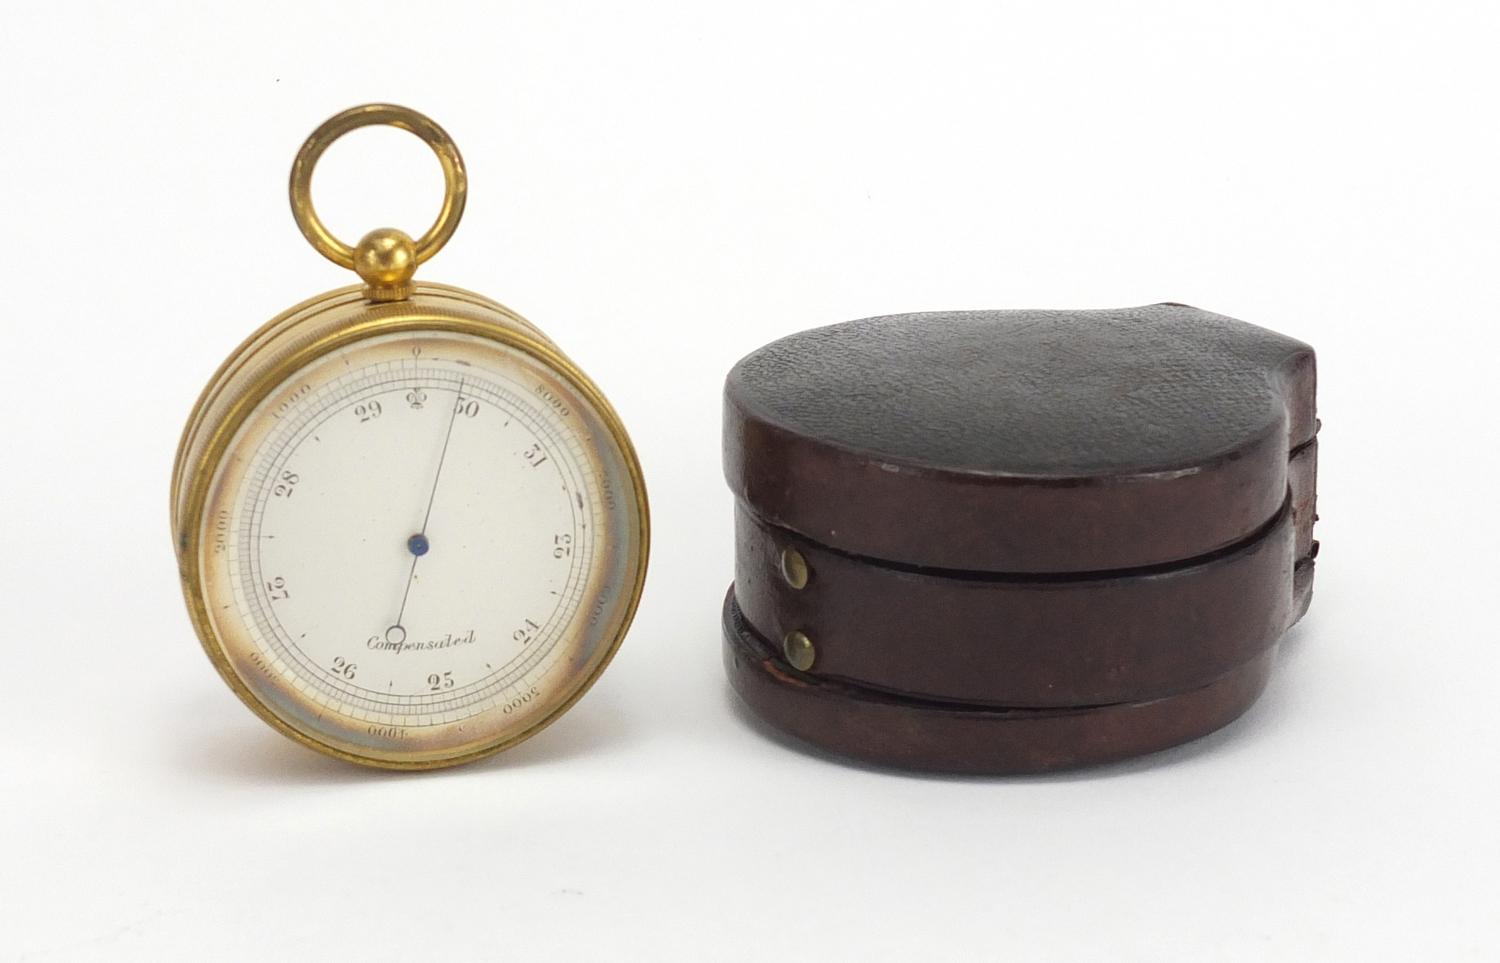 19th century gilt brass pocket weath station with compensated barometer, thermometer and compass,